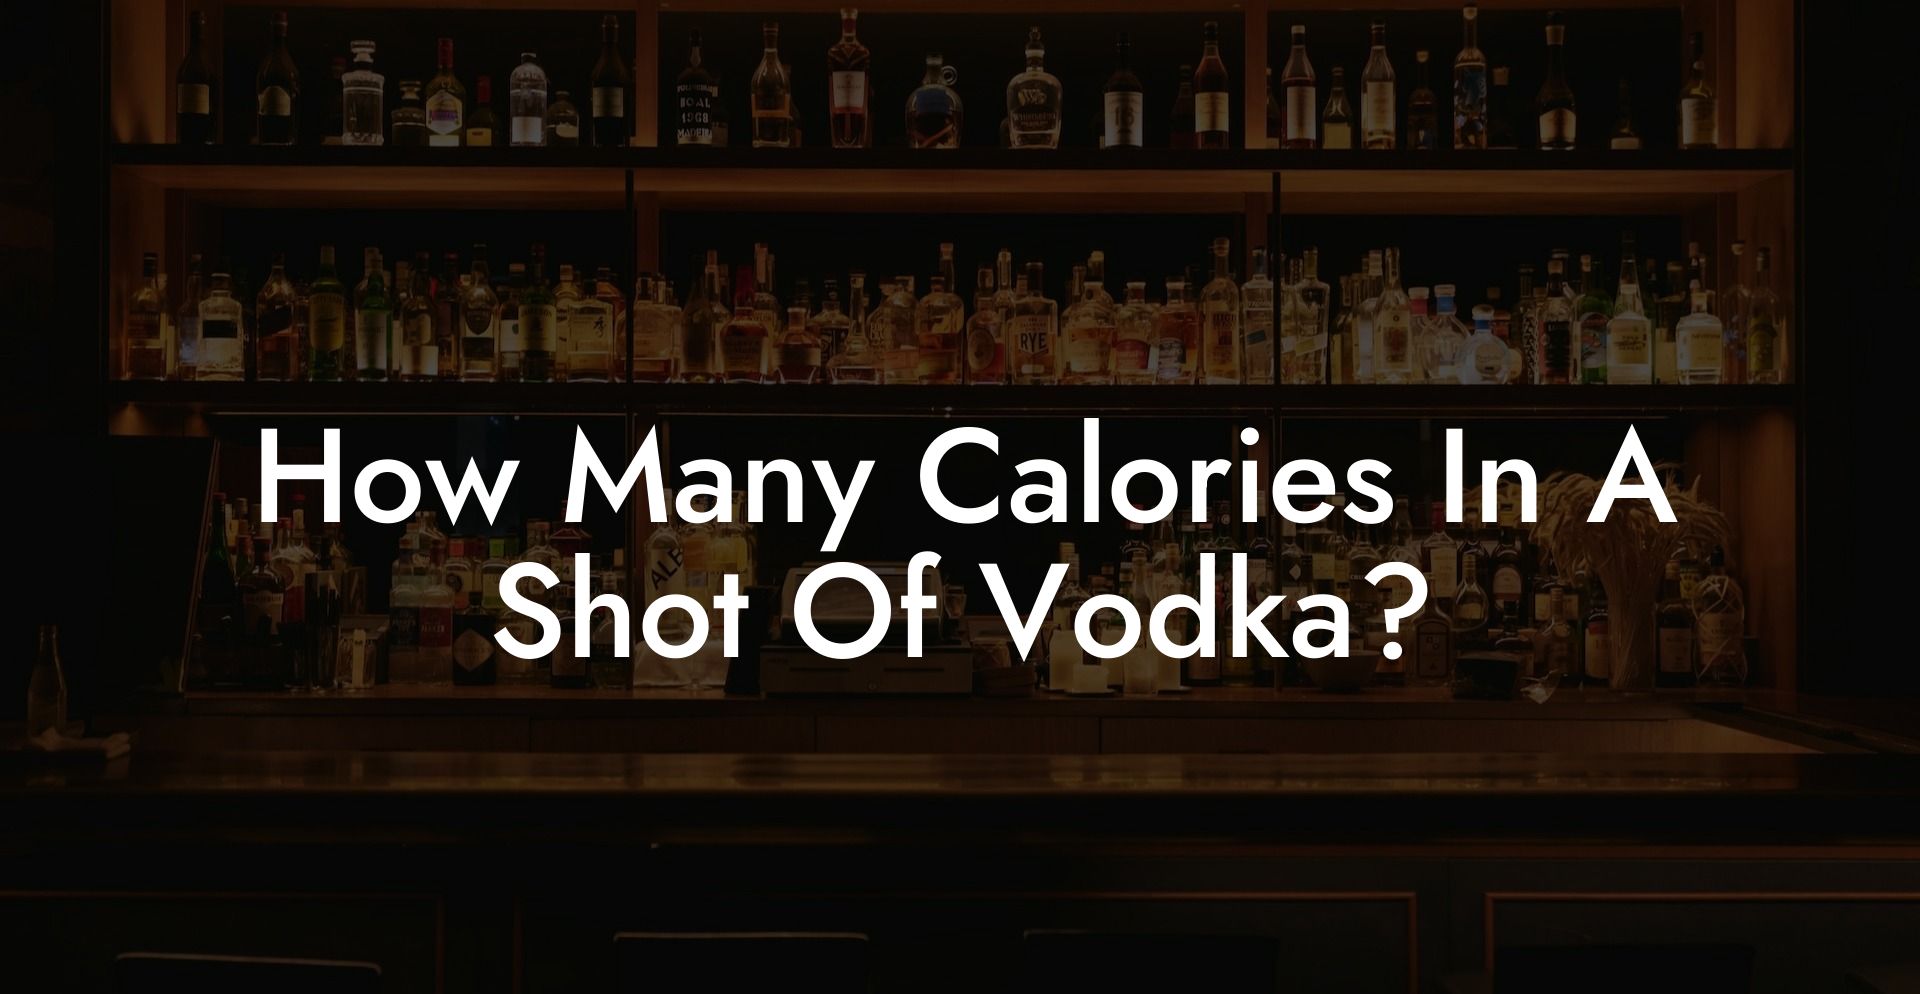 How Many Calories In A Shot Of Vodka